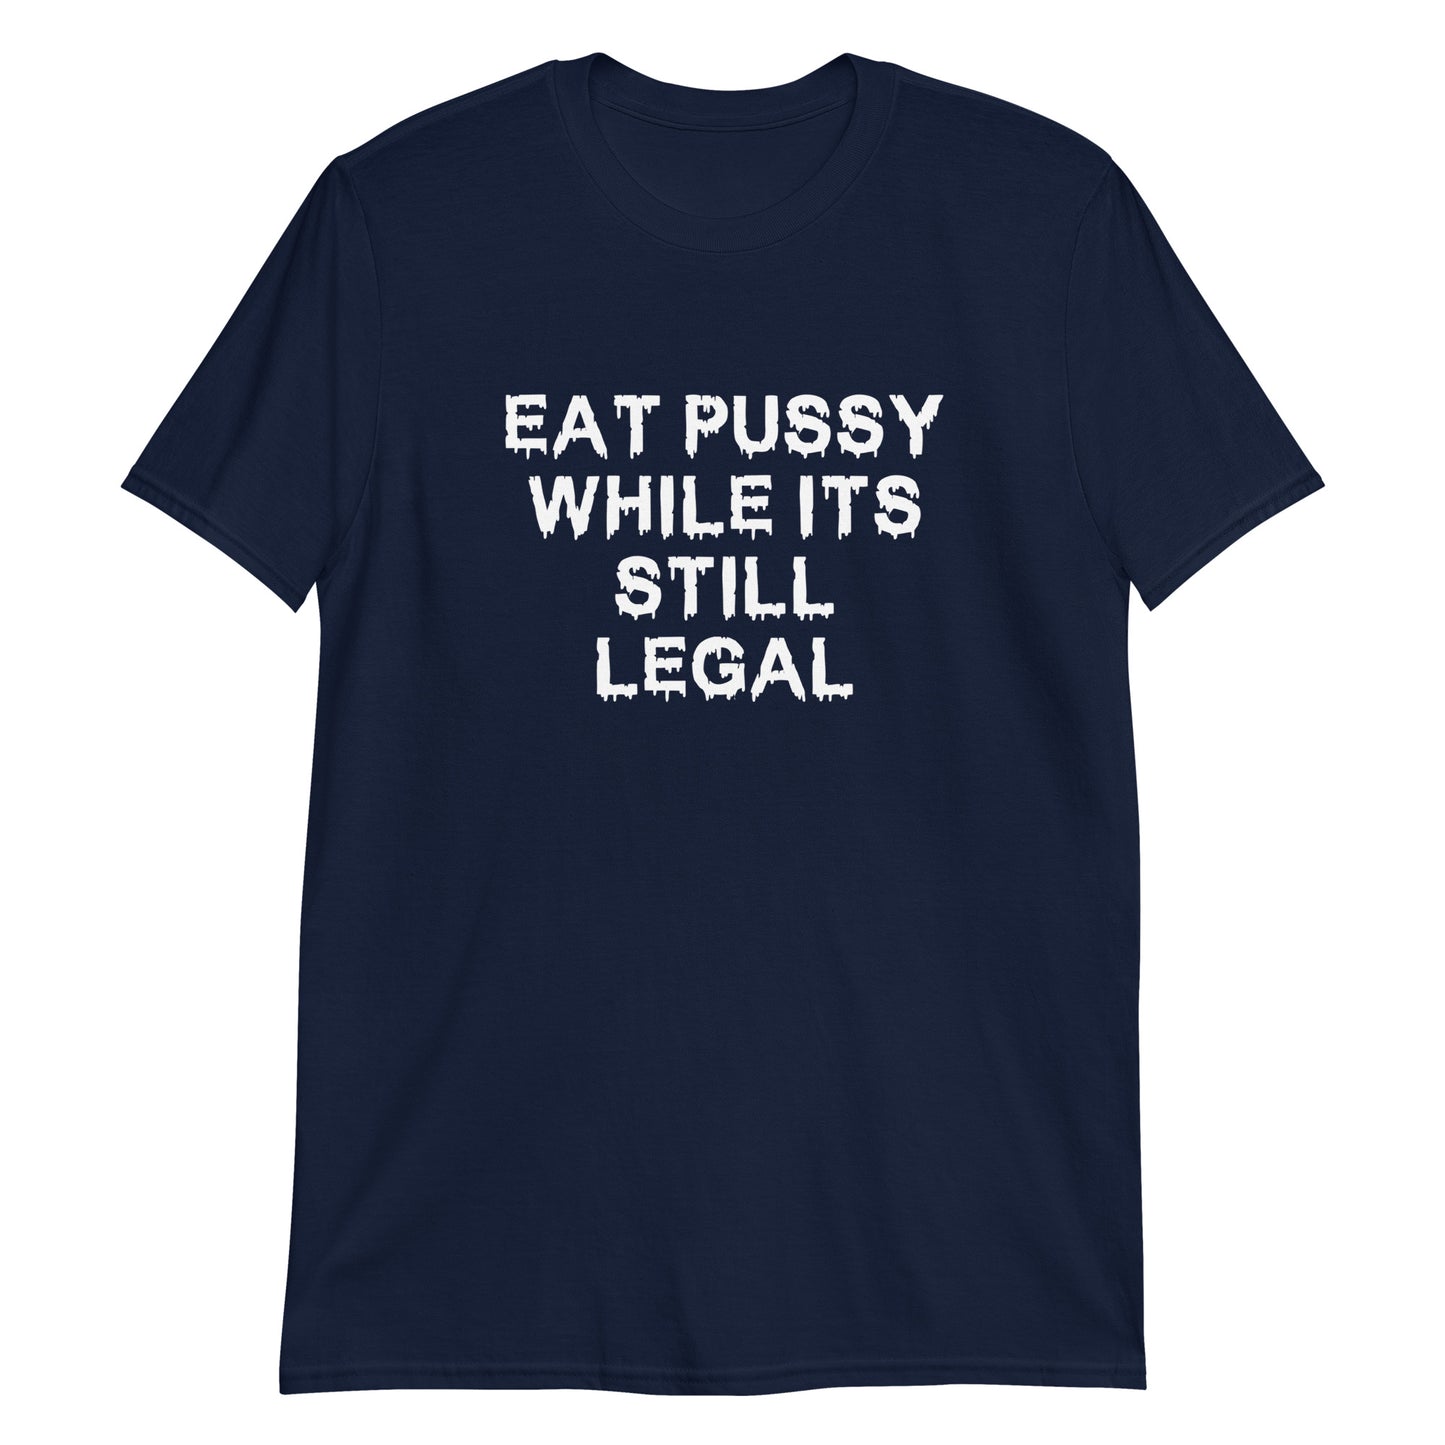 Eat Pussy While It's Still Legal.